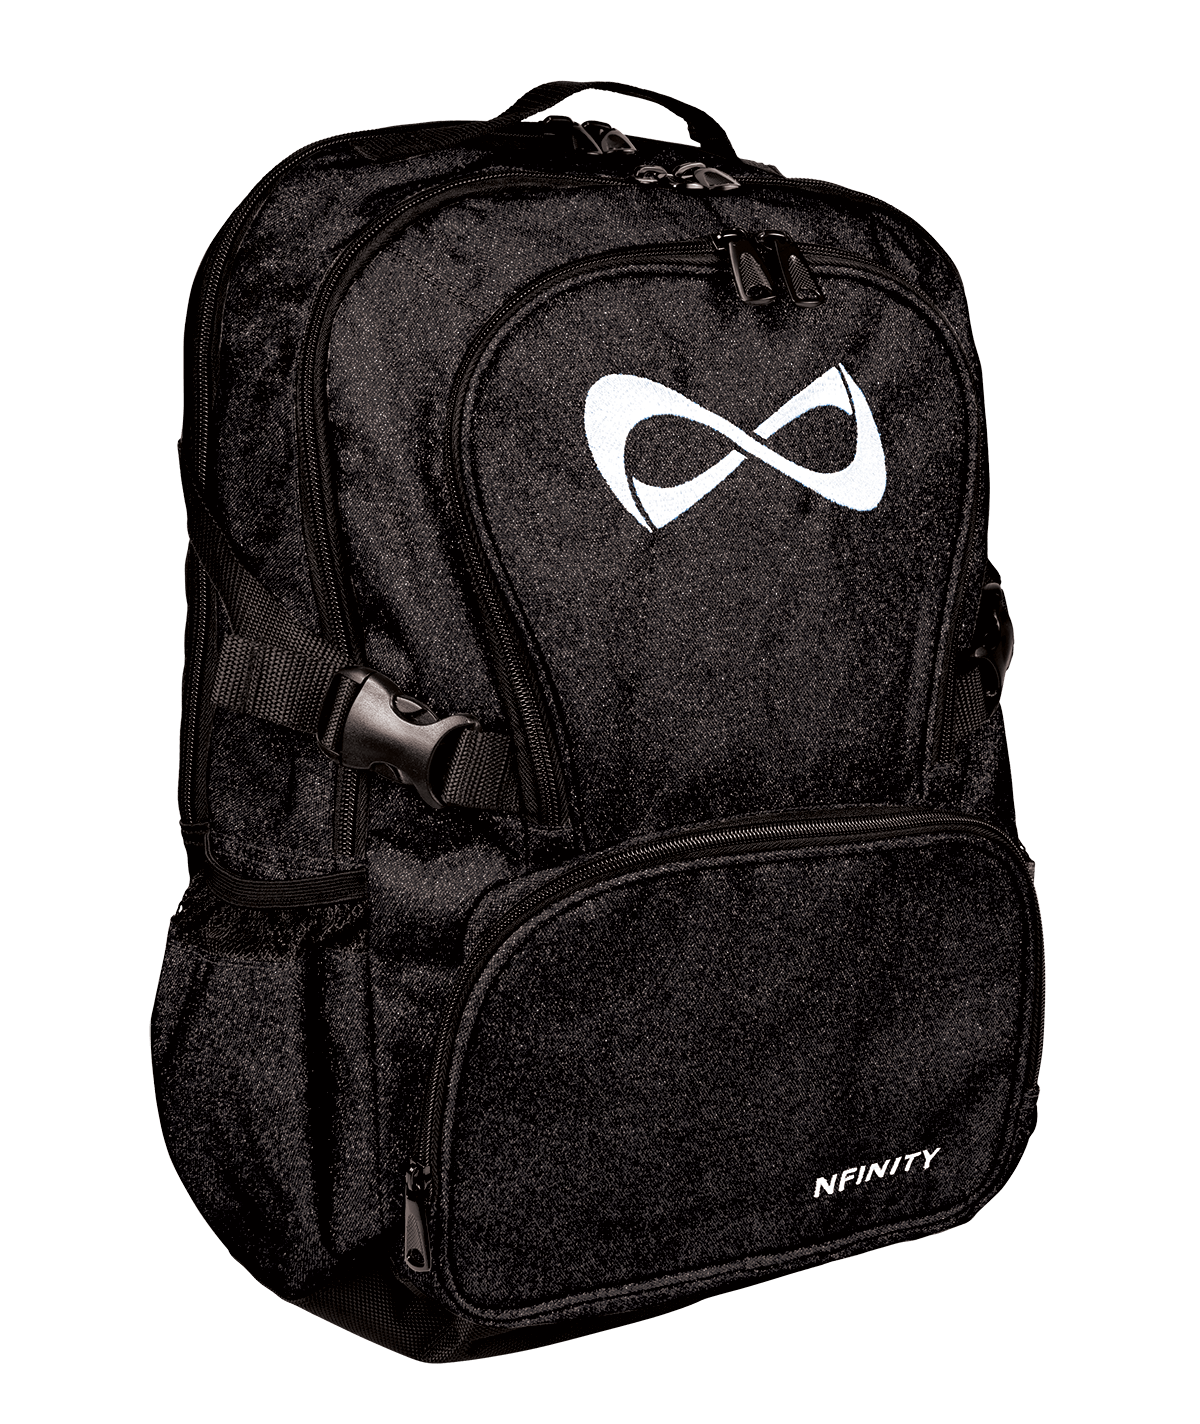 personalized glitter backpack